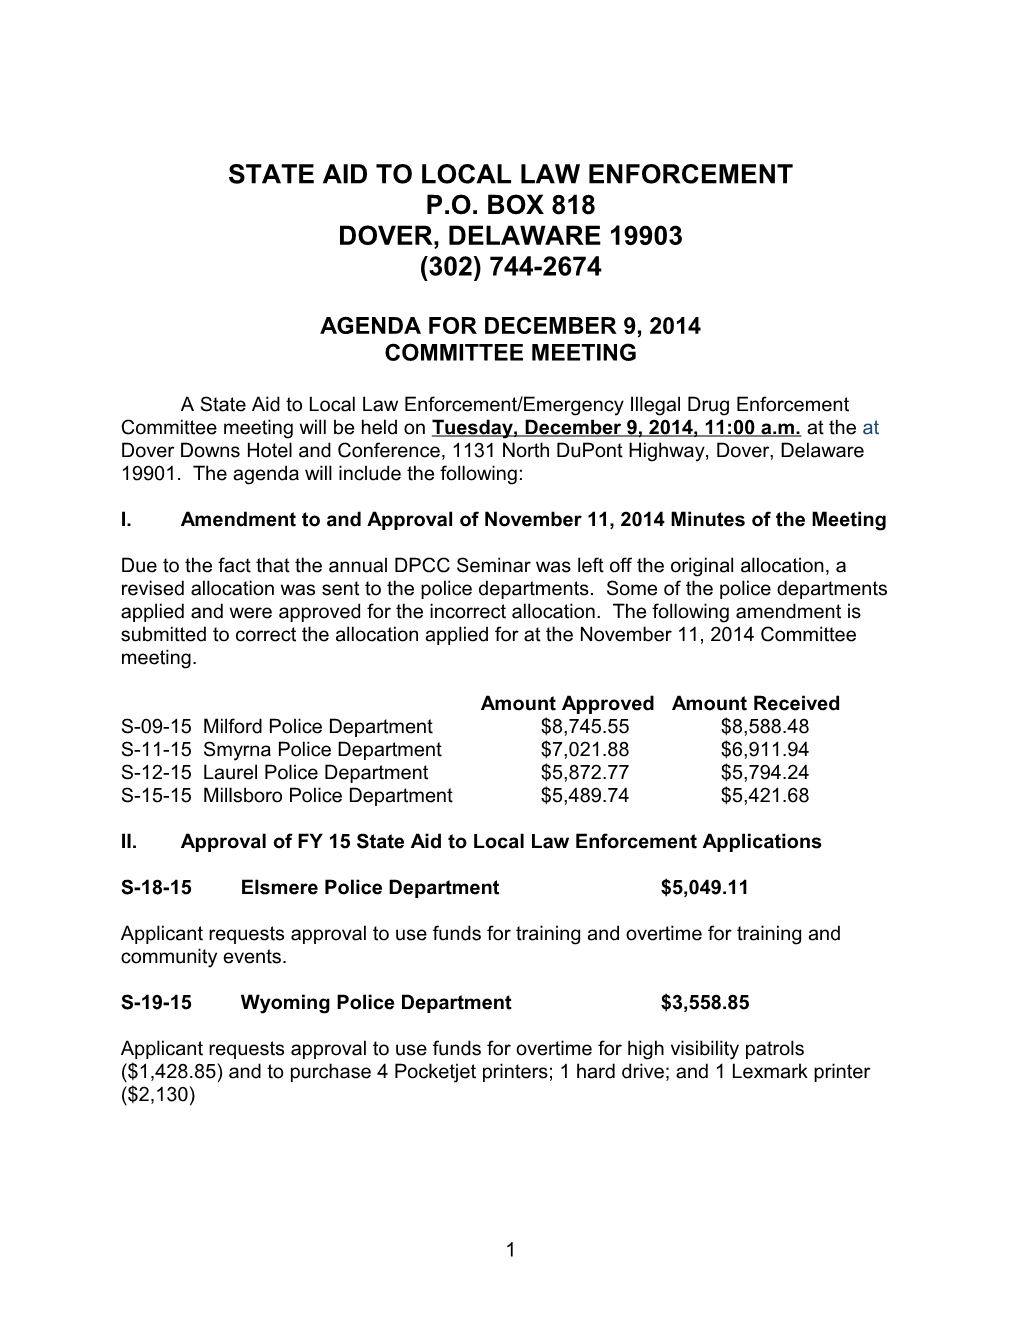 State Aid to Local Law Enforcement s2